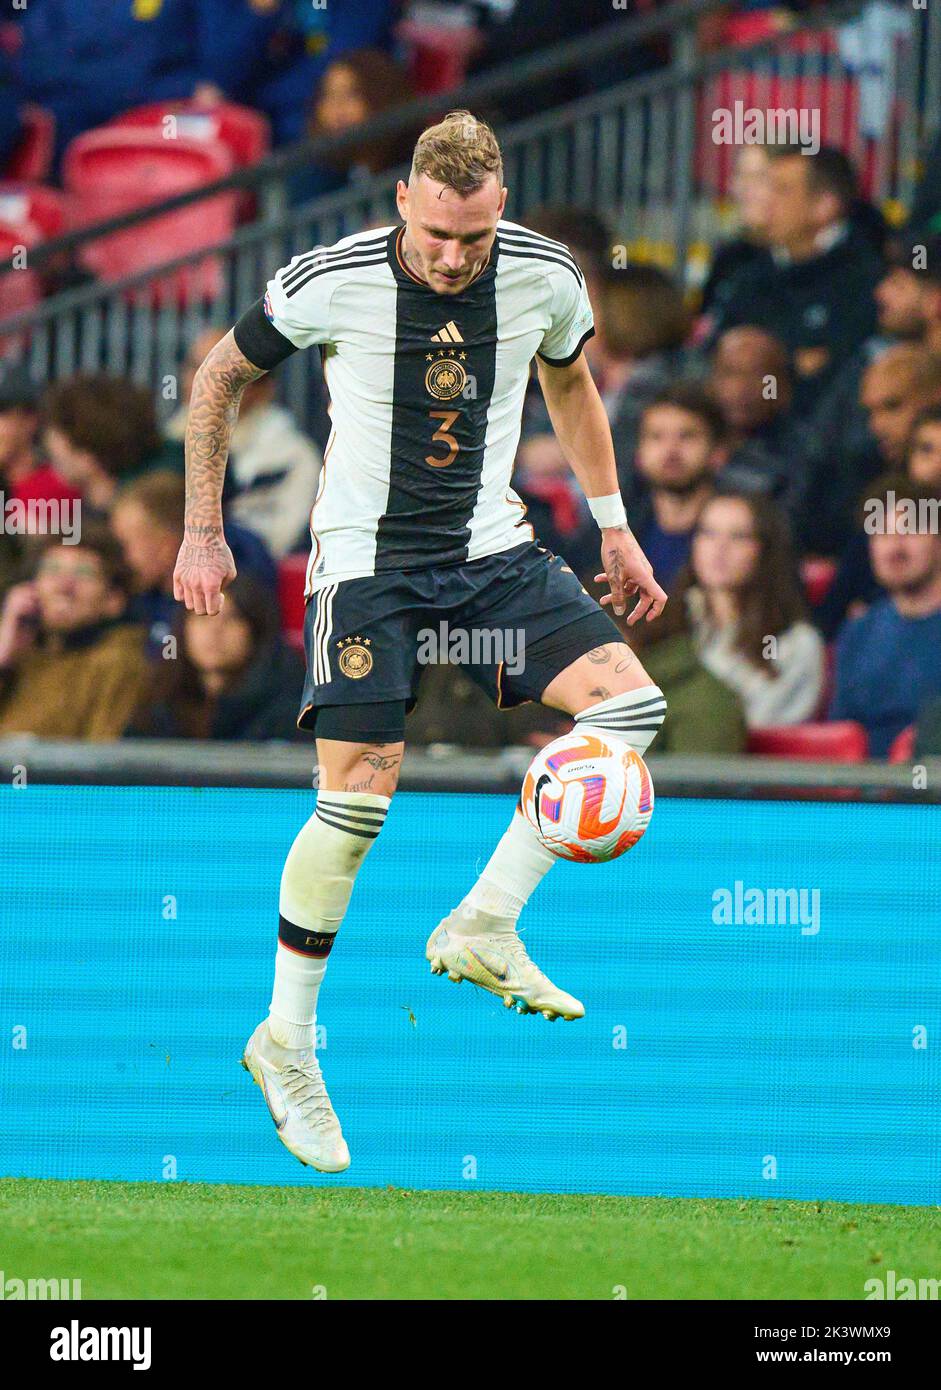 David Raum, DFB 3  in the UEFA Nations League 2022 match  ENGLAND - GERMANY 3-3  in Season 2022/2023 on Sept 26, 2022  in London, Great Britain.  © Peter Schatz / Alamy Live News Stock Photo